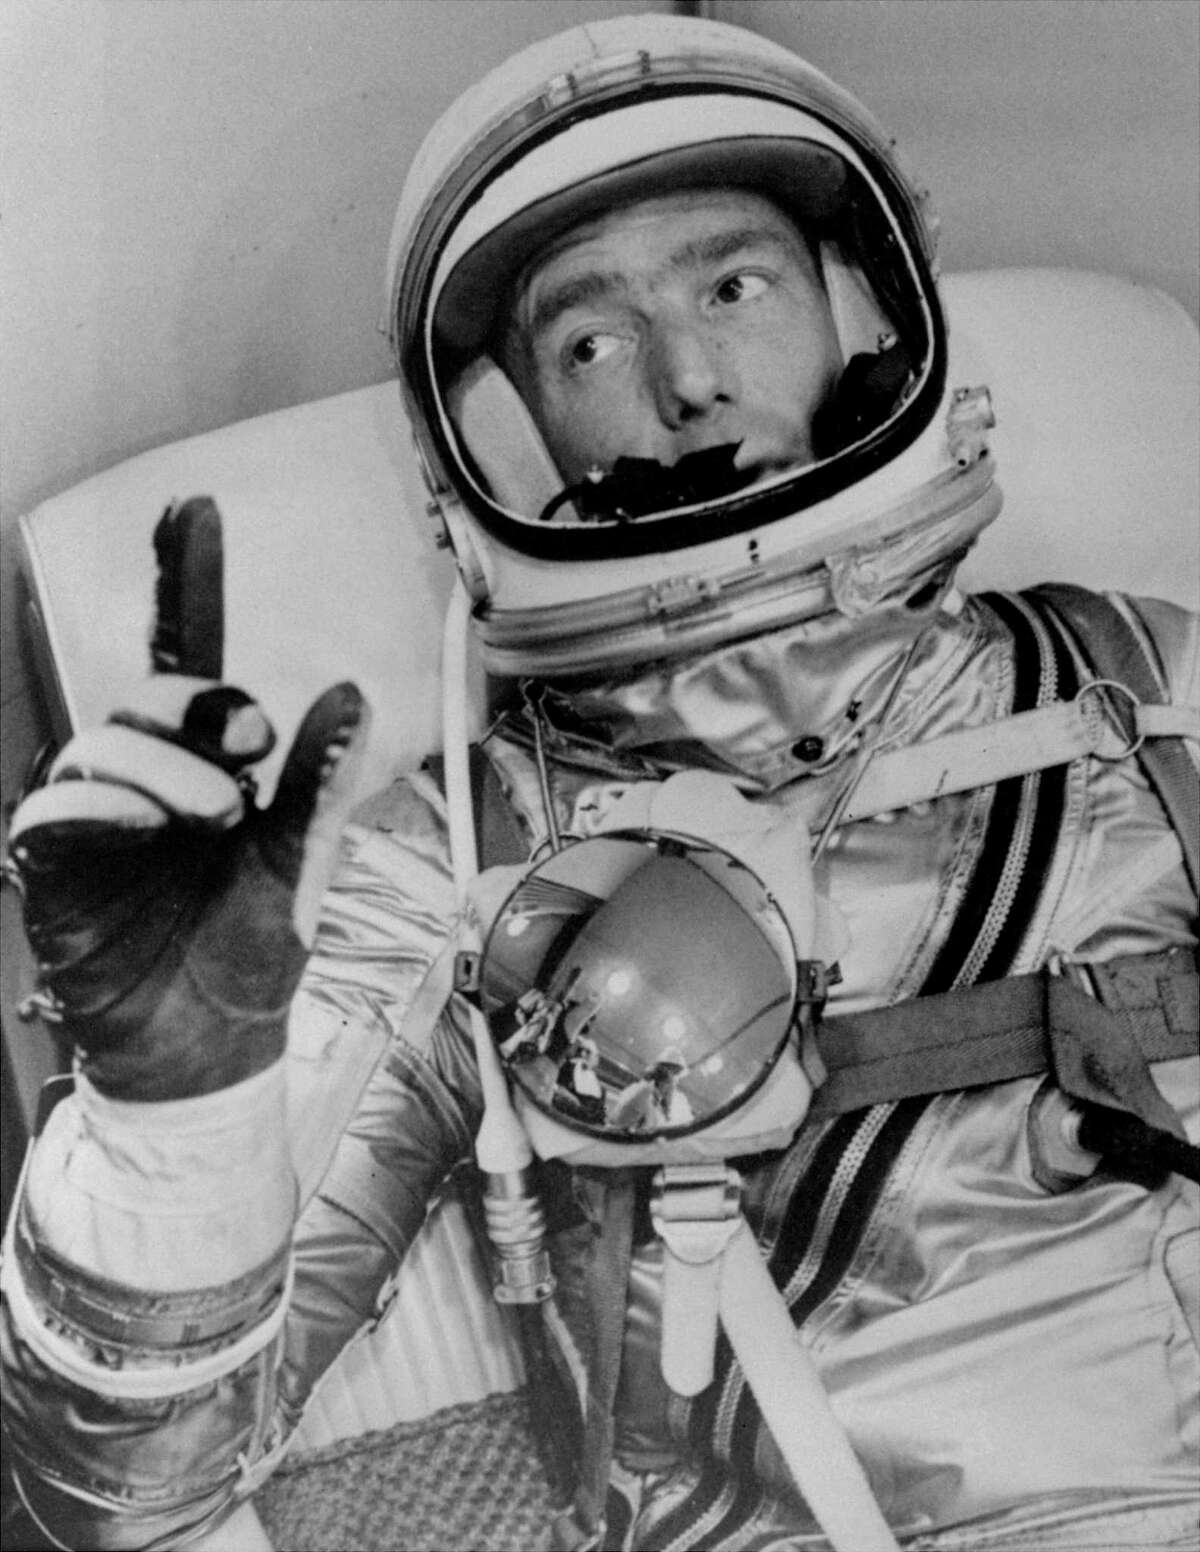 Astronaut Scott Carpenter on his way to being the second American in orbit at Cape Canaveral, Fla., May 24, 1962. He was a pioneer of space and the oceans.